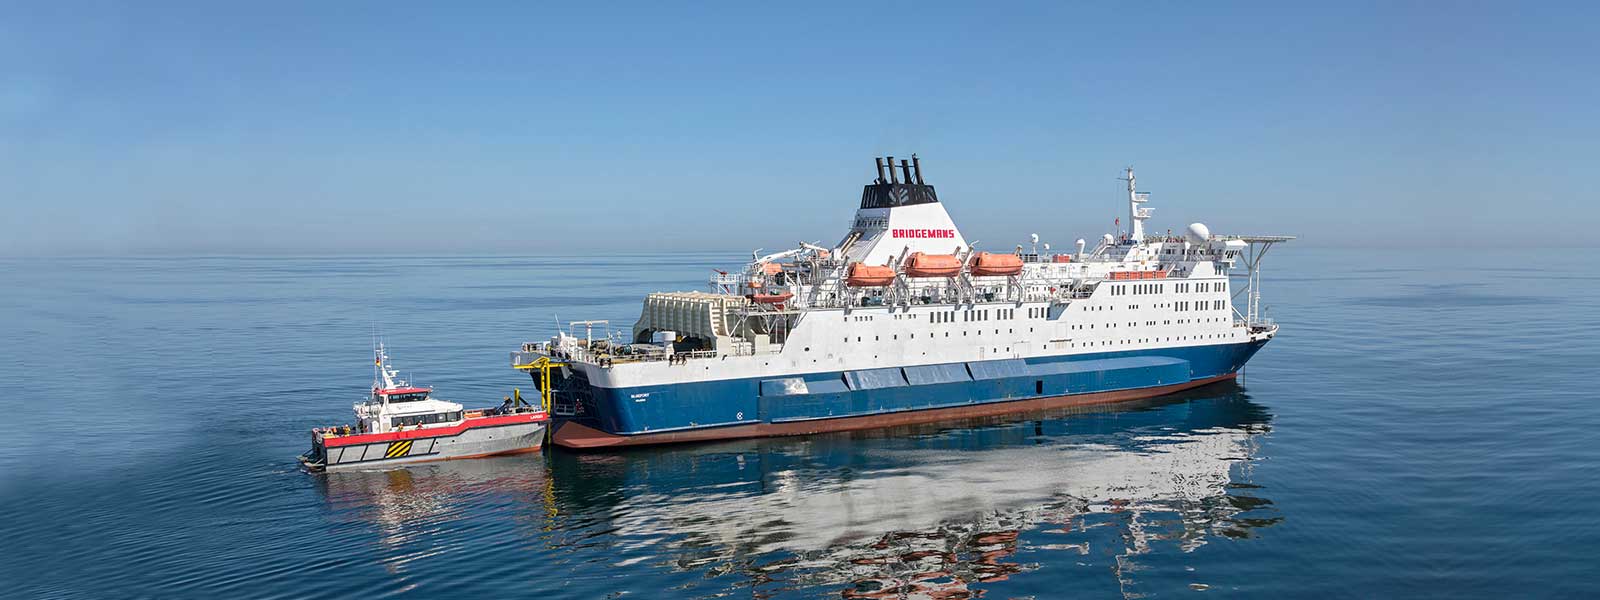 Final Bluefort transfer at Wikinger as charter concludes